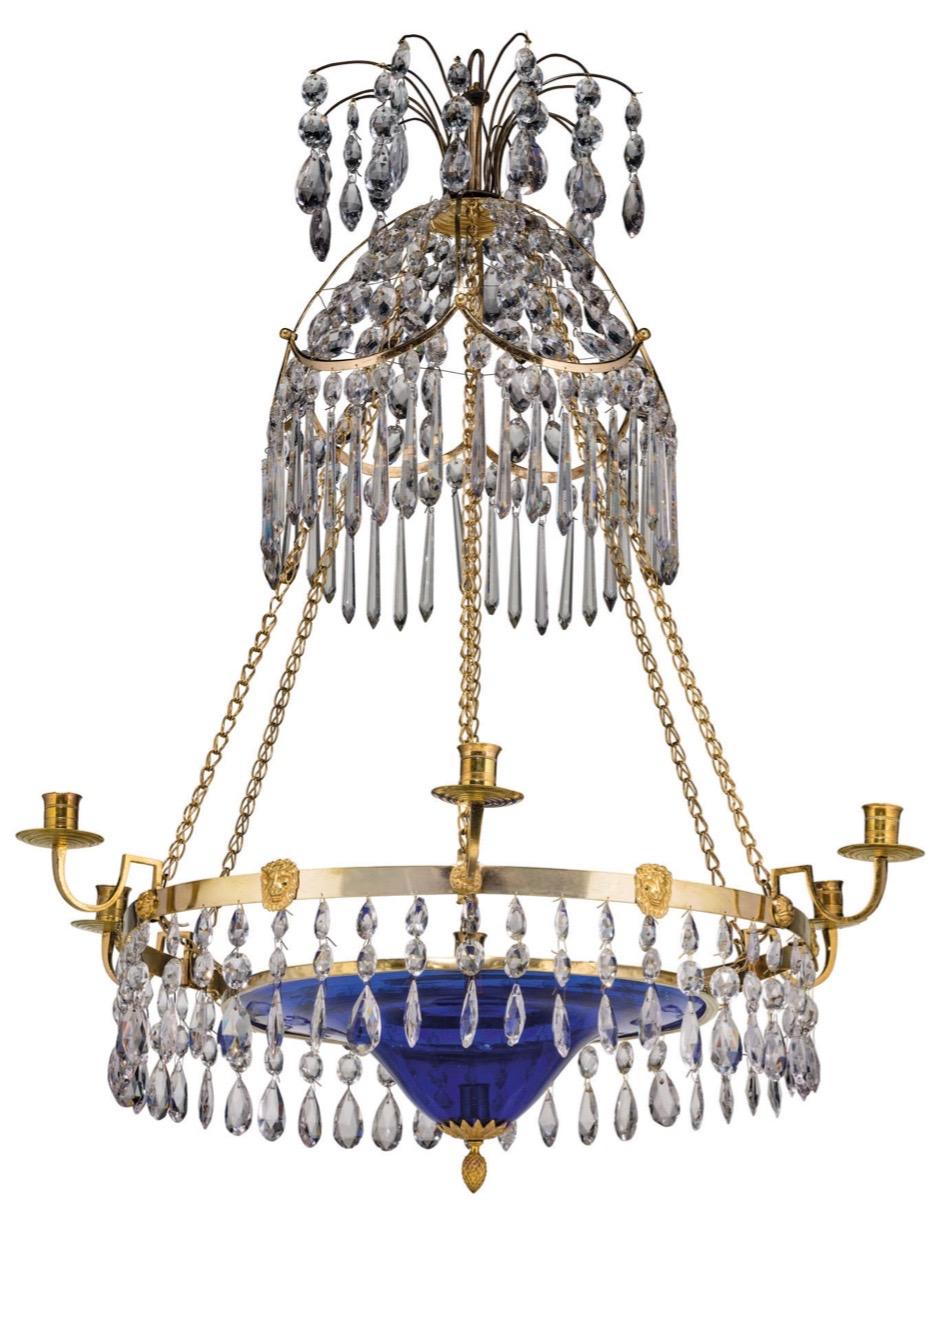 A finely designed Gustavian chandelier made for seven candles. It has six candle-arms around the ring and one candleholder in the middle of the blue bottom bowl. In Sweden we call this a poor mans candle.
The rings, chains etc are made of gilt